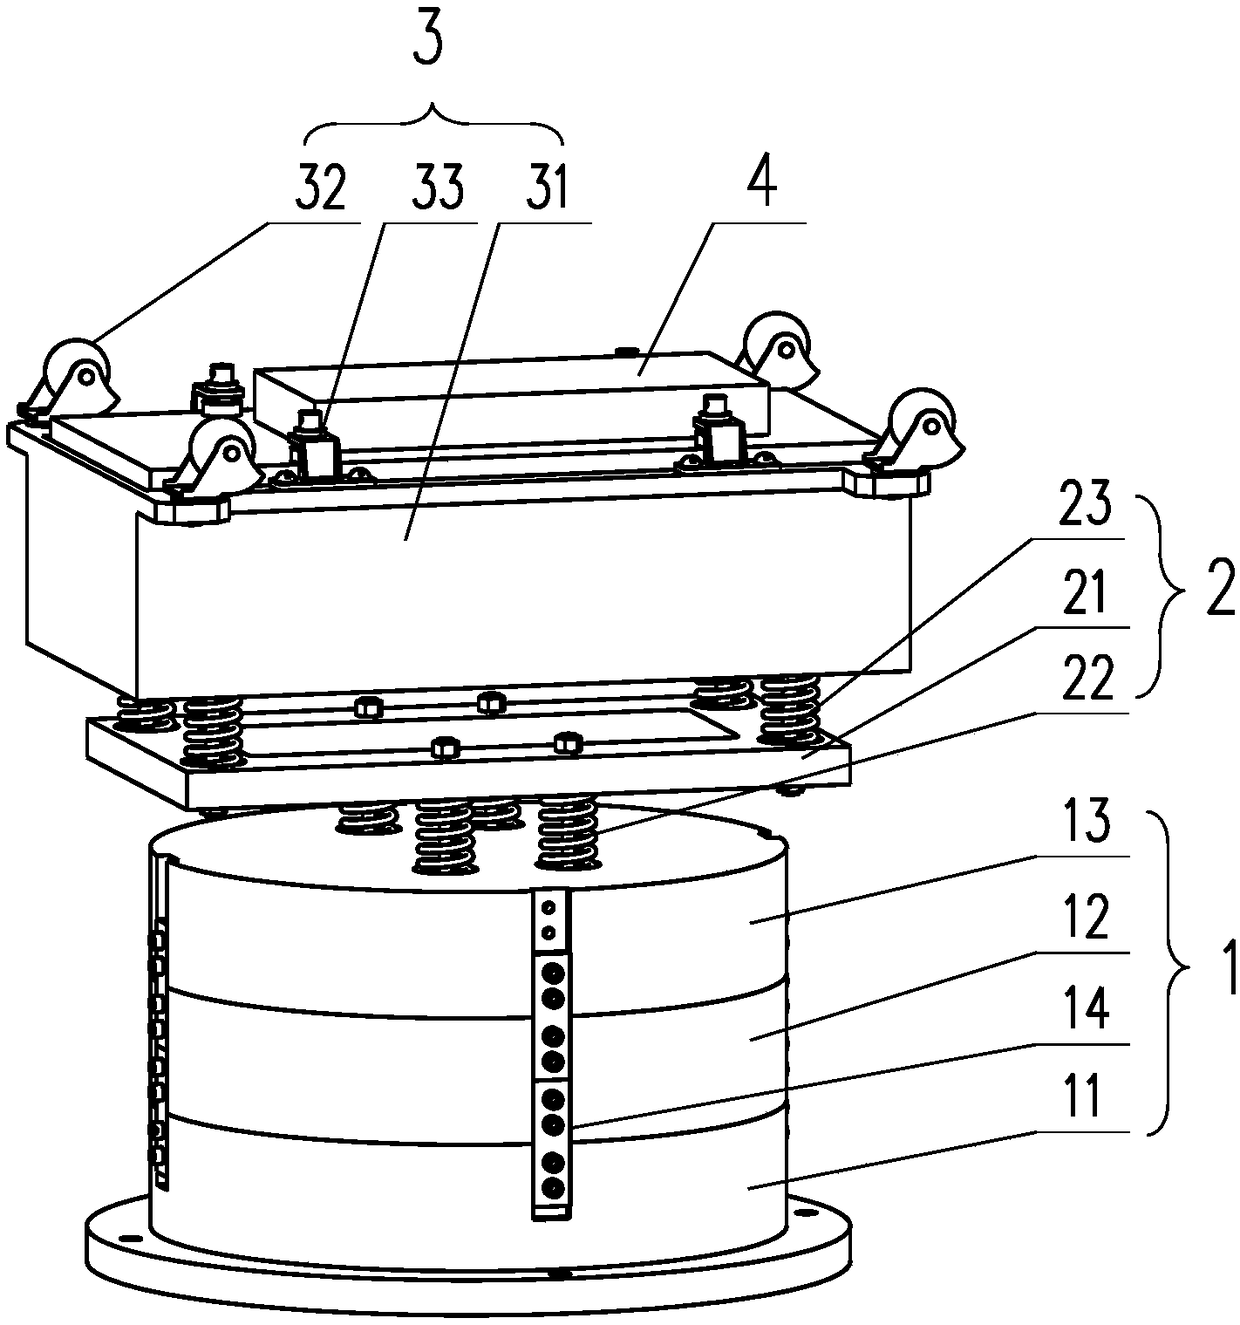 Two-stage spring type tunnel detecting radar tray device